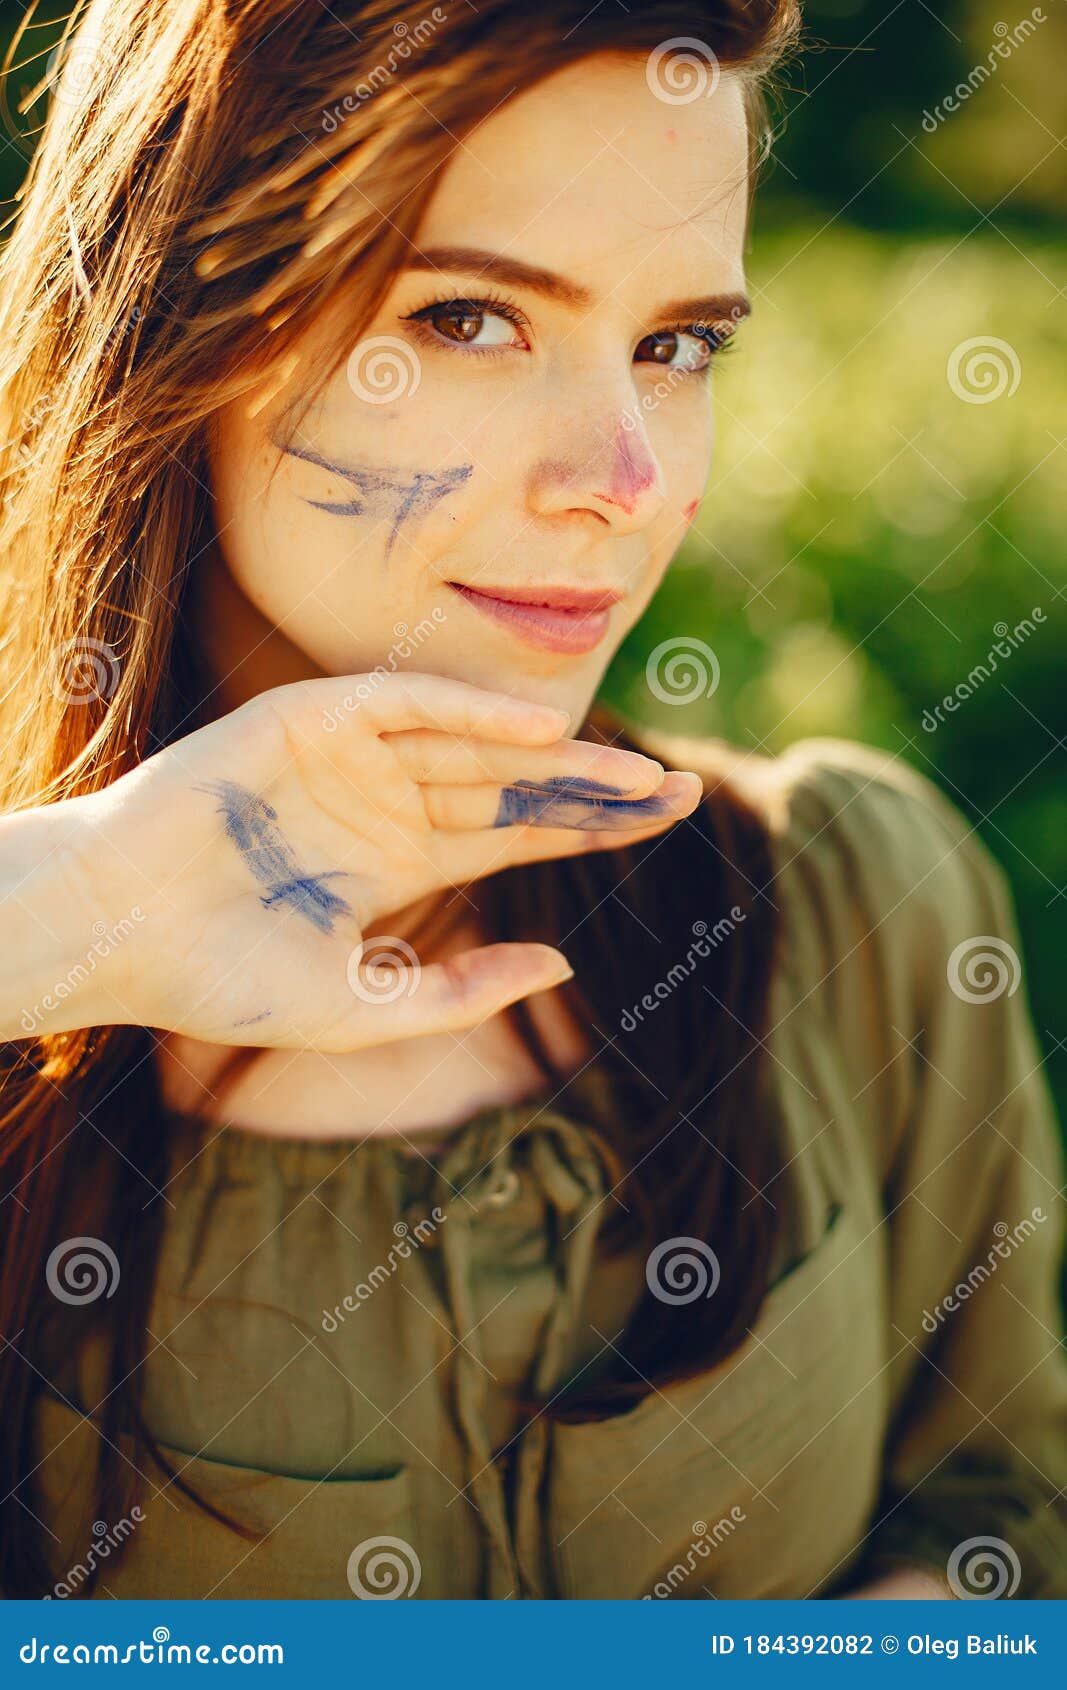 Elegant and Beautiful Girl Painting in a Field Stock Photo - Image of ...